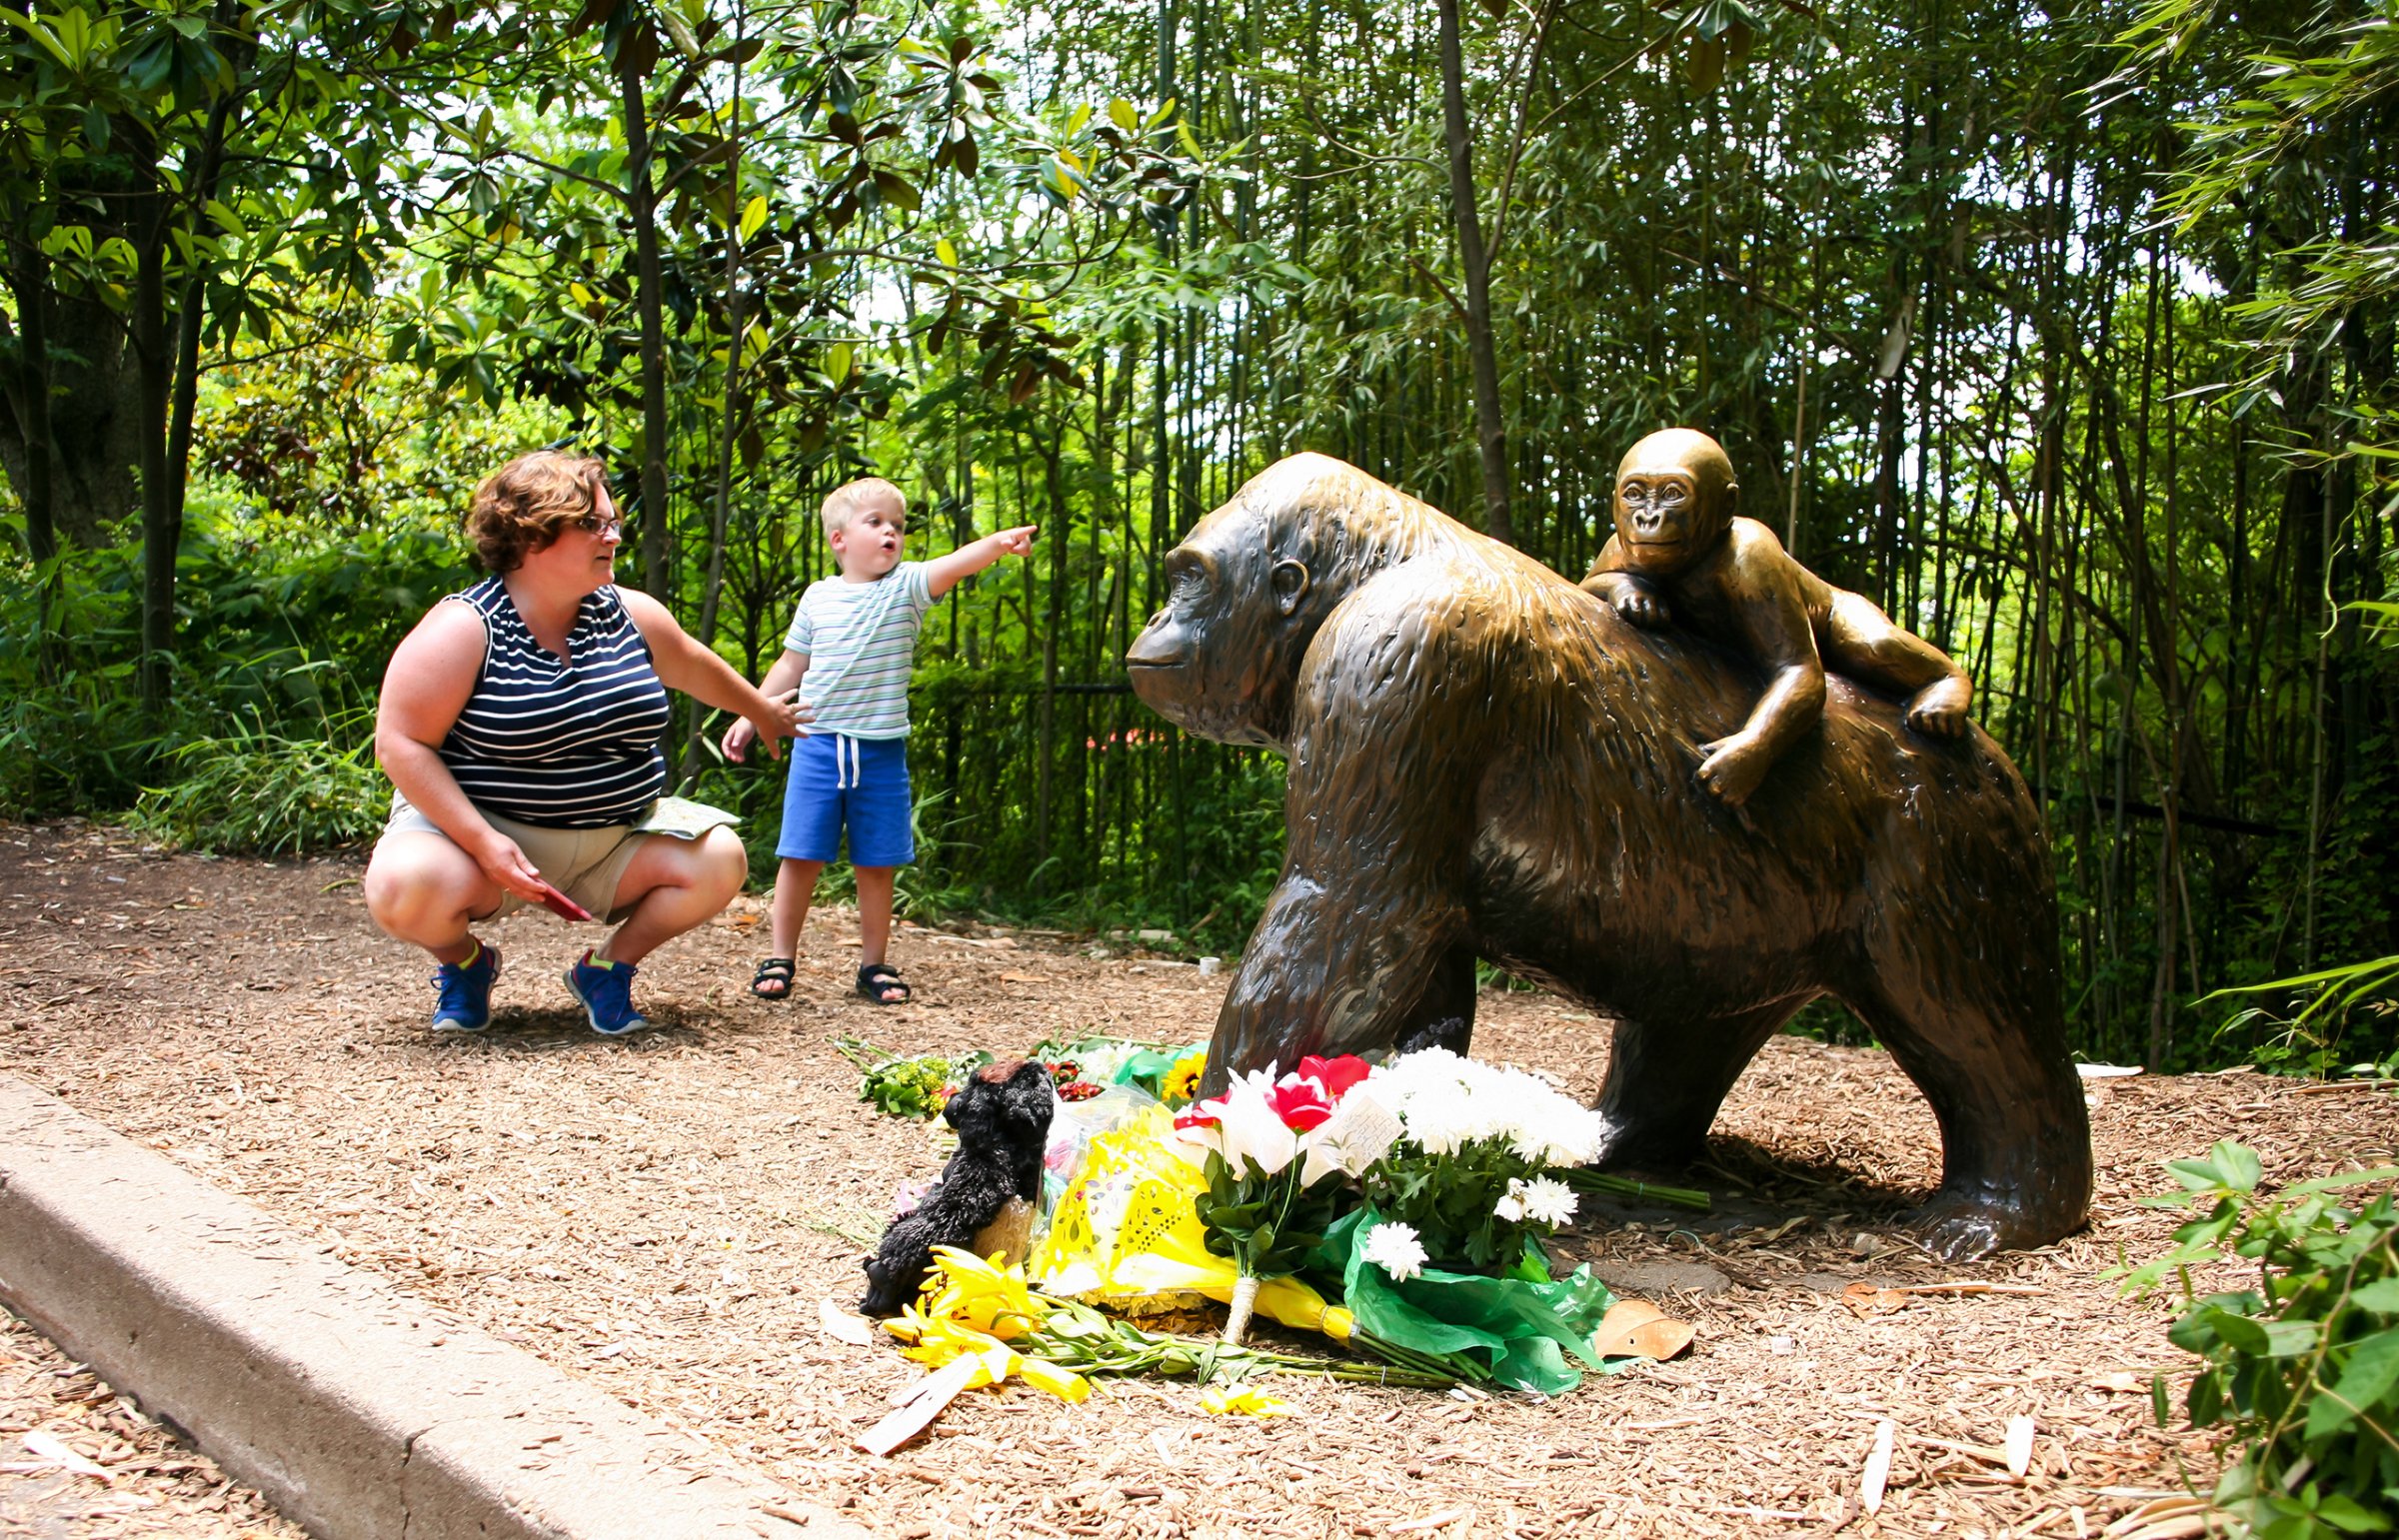 A mother and her child visit a bronze statue of a gorilla outside the Cincinnati Zoo's Gorilla World exhibit, two days after officials were forced to kill Harambe, a Western lowland gorilla, in Cincinnati, May 30, 2016.